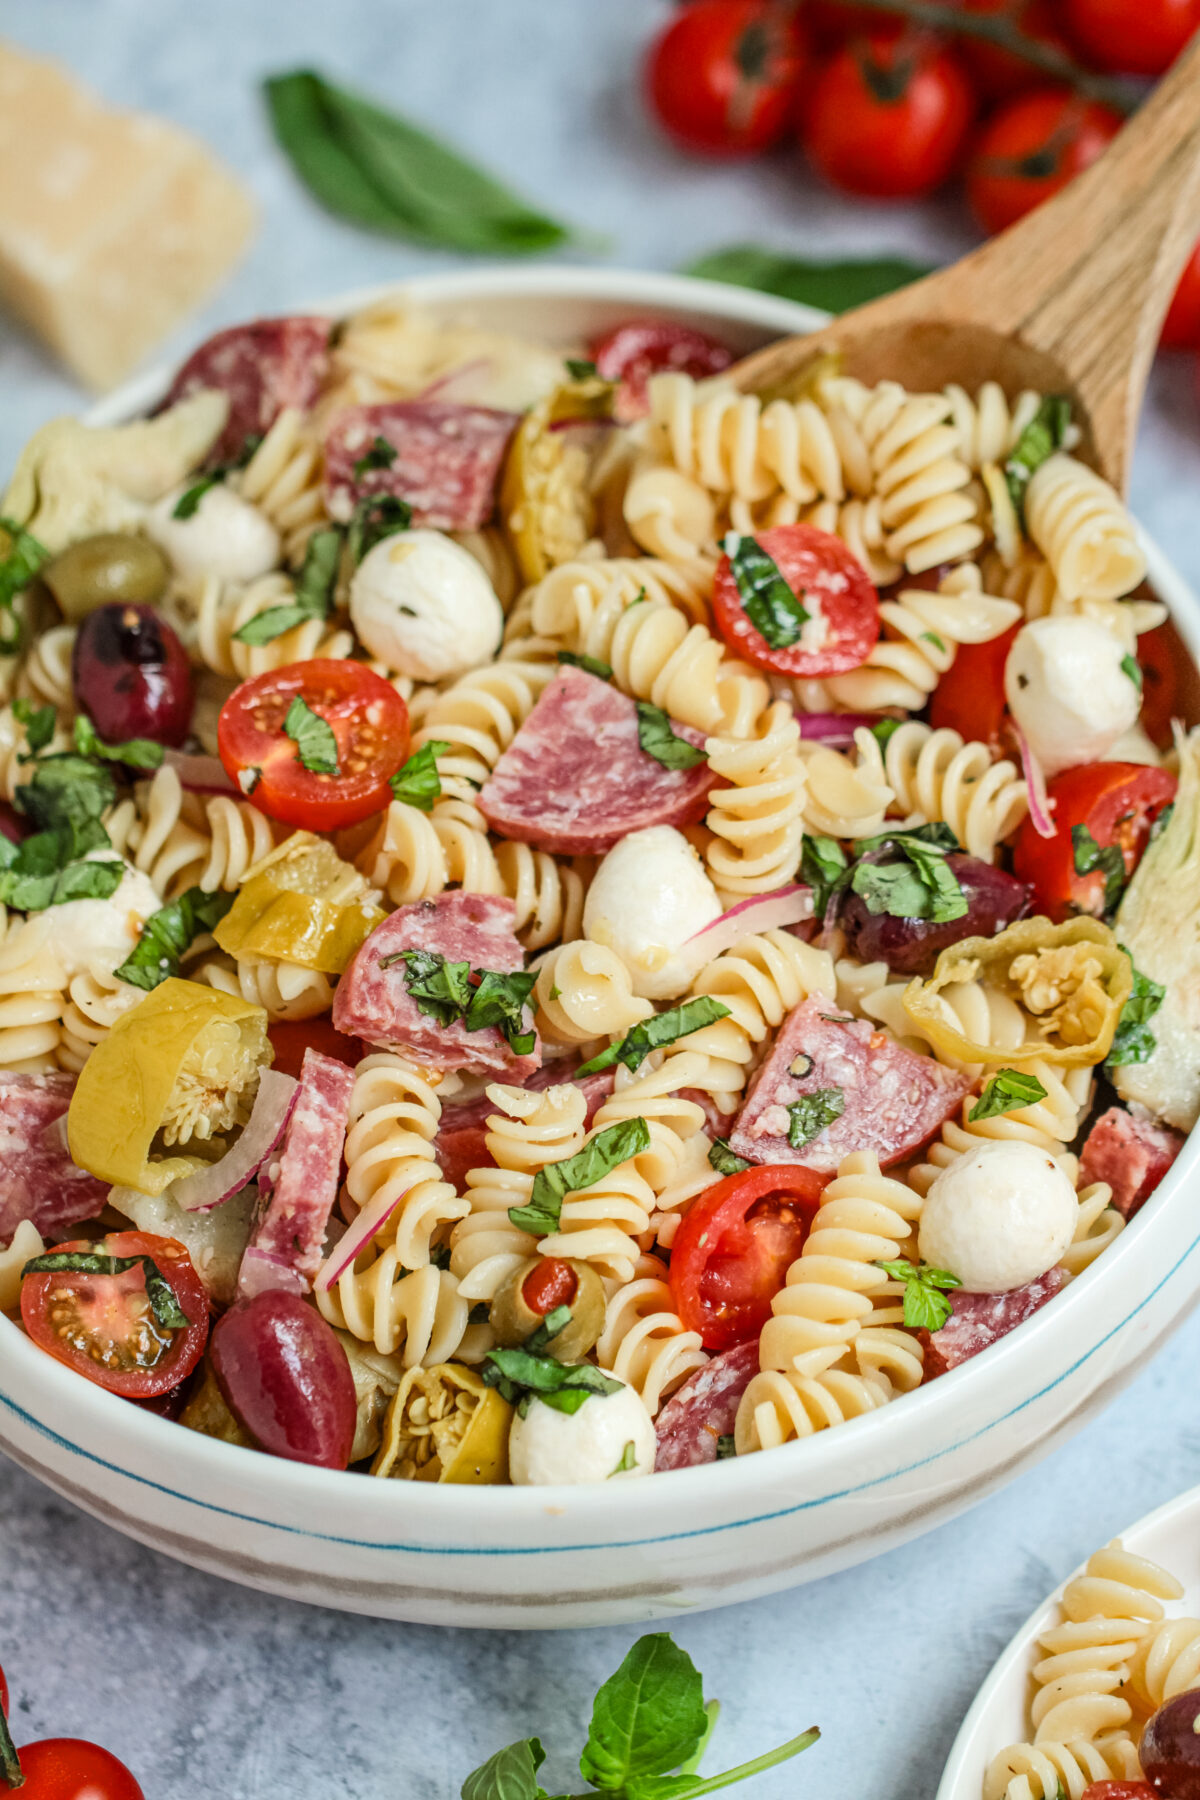 Bring delicious Italian flavours together in one easy side dish with this colourful antipasto pasta salad. Perfect for any occasion!